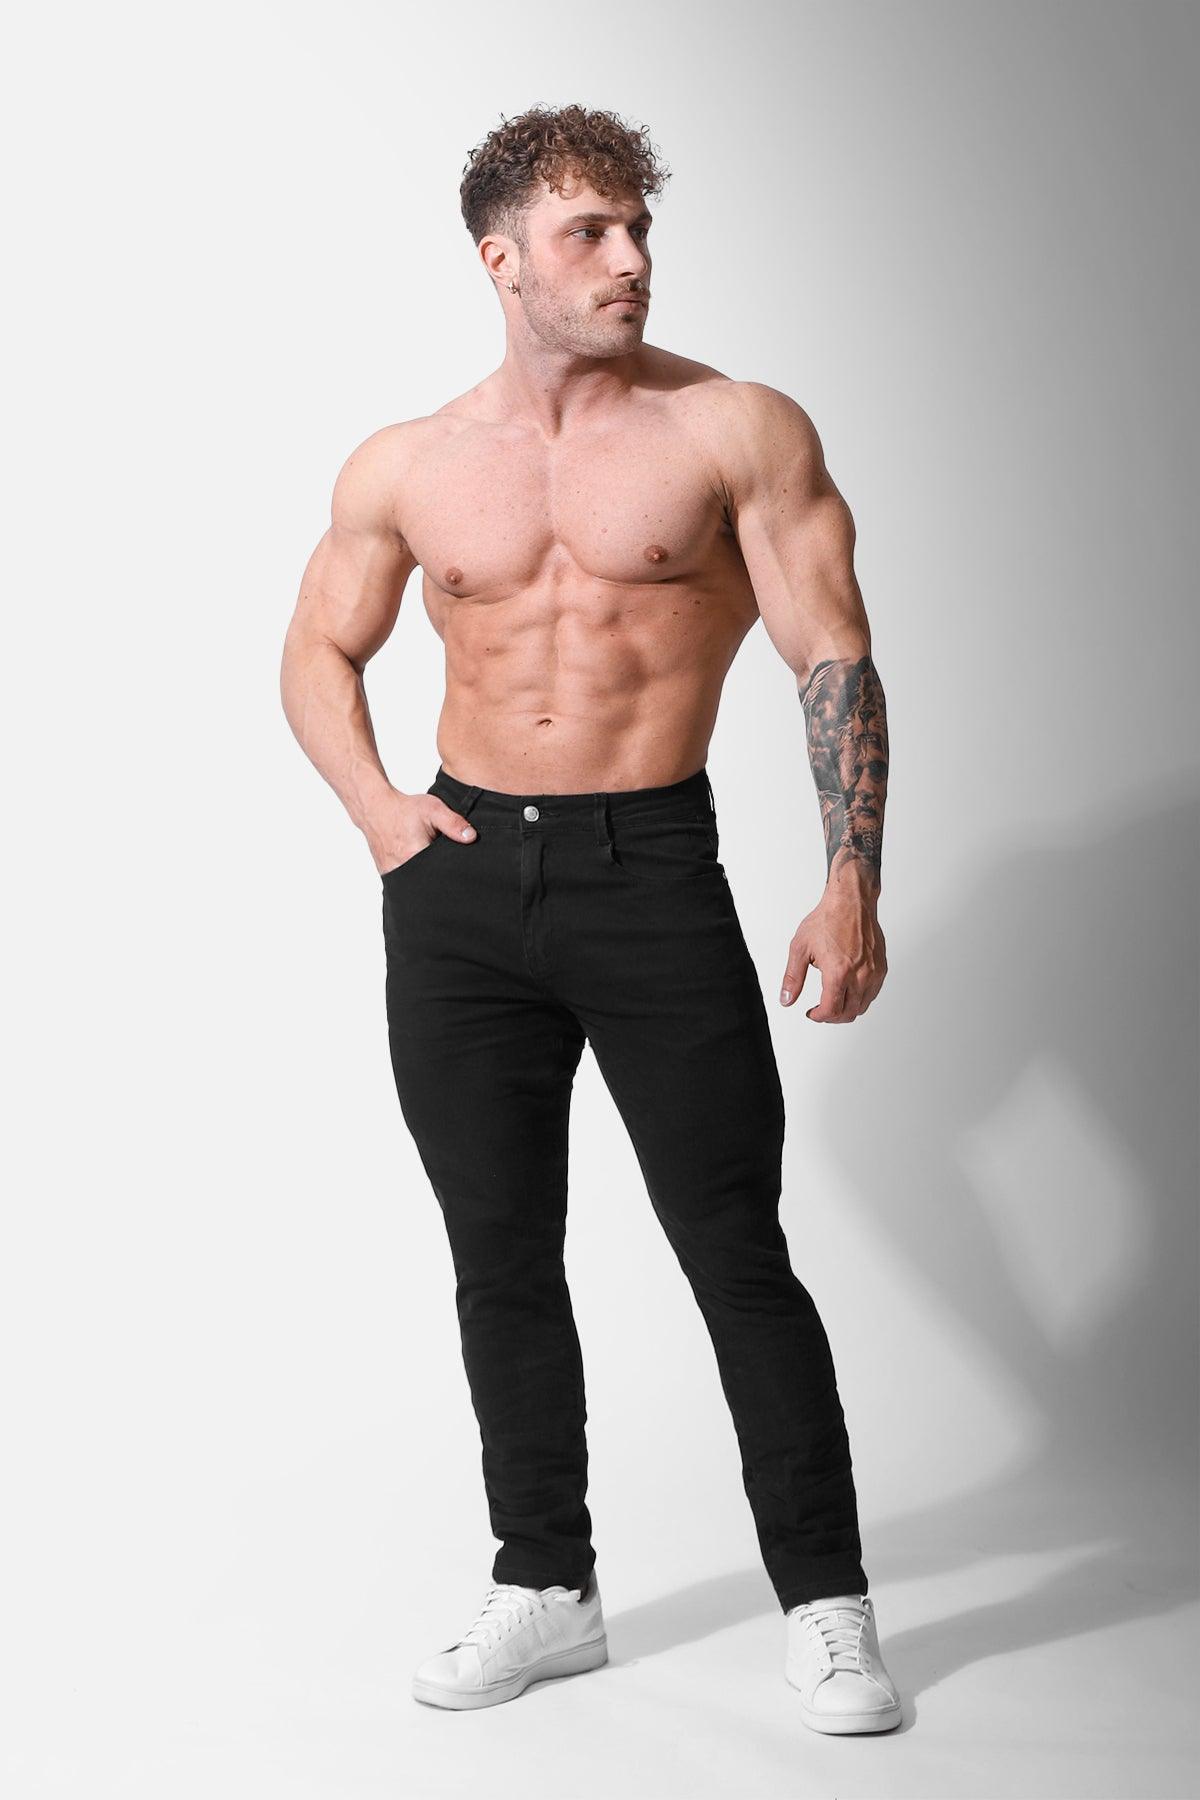 Men's Fitted Stretchy Pants - Black - Jed North Canada